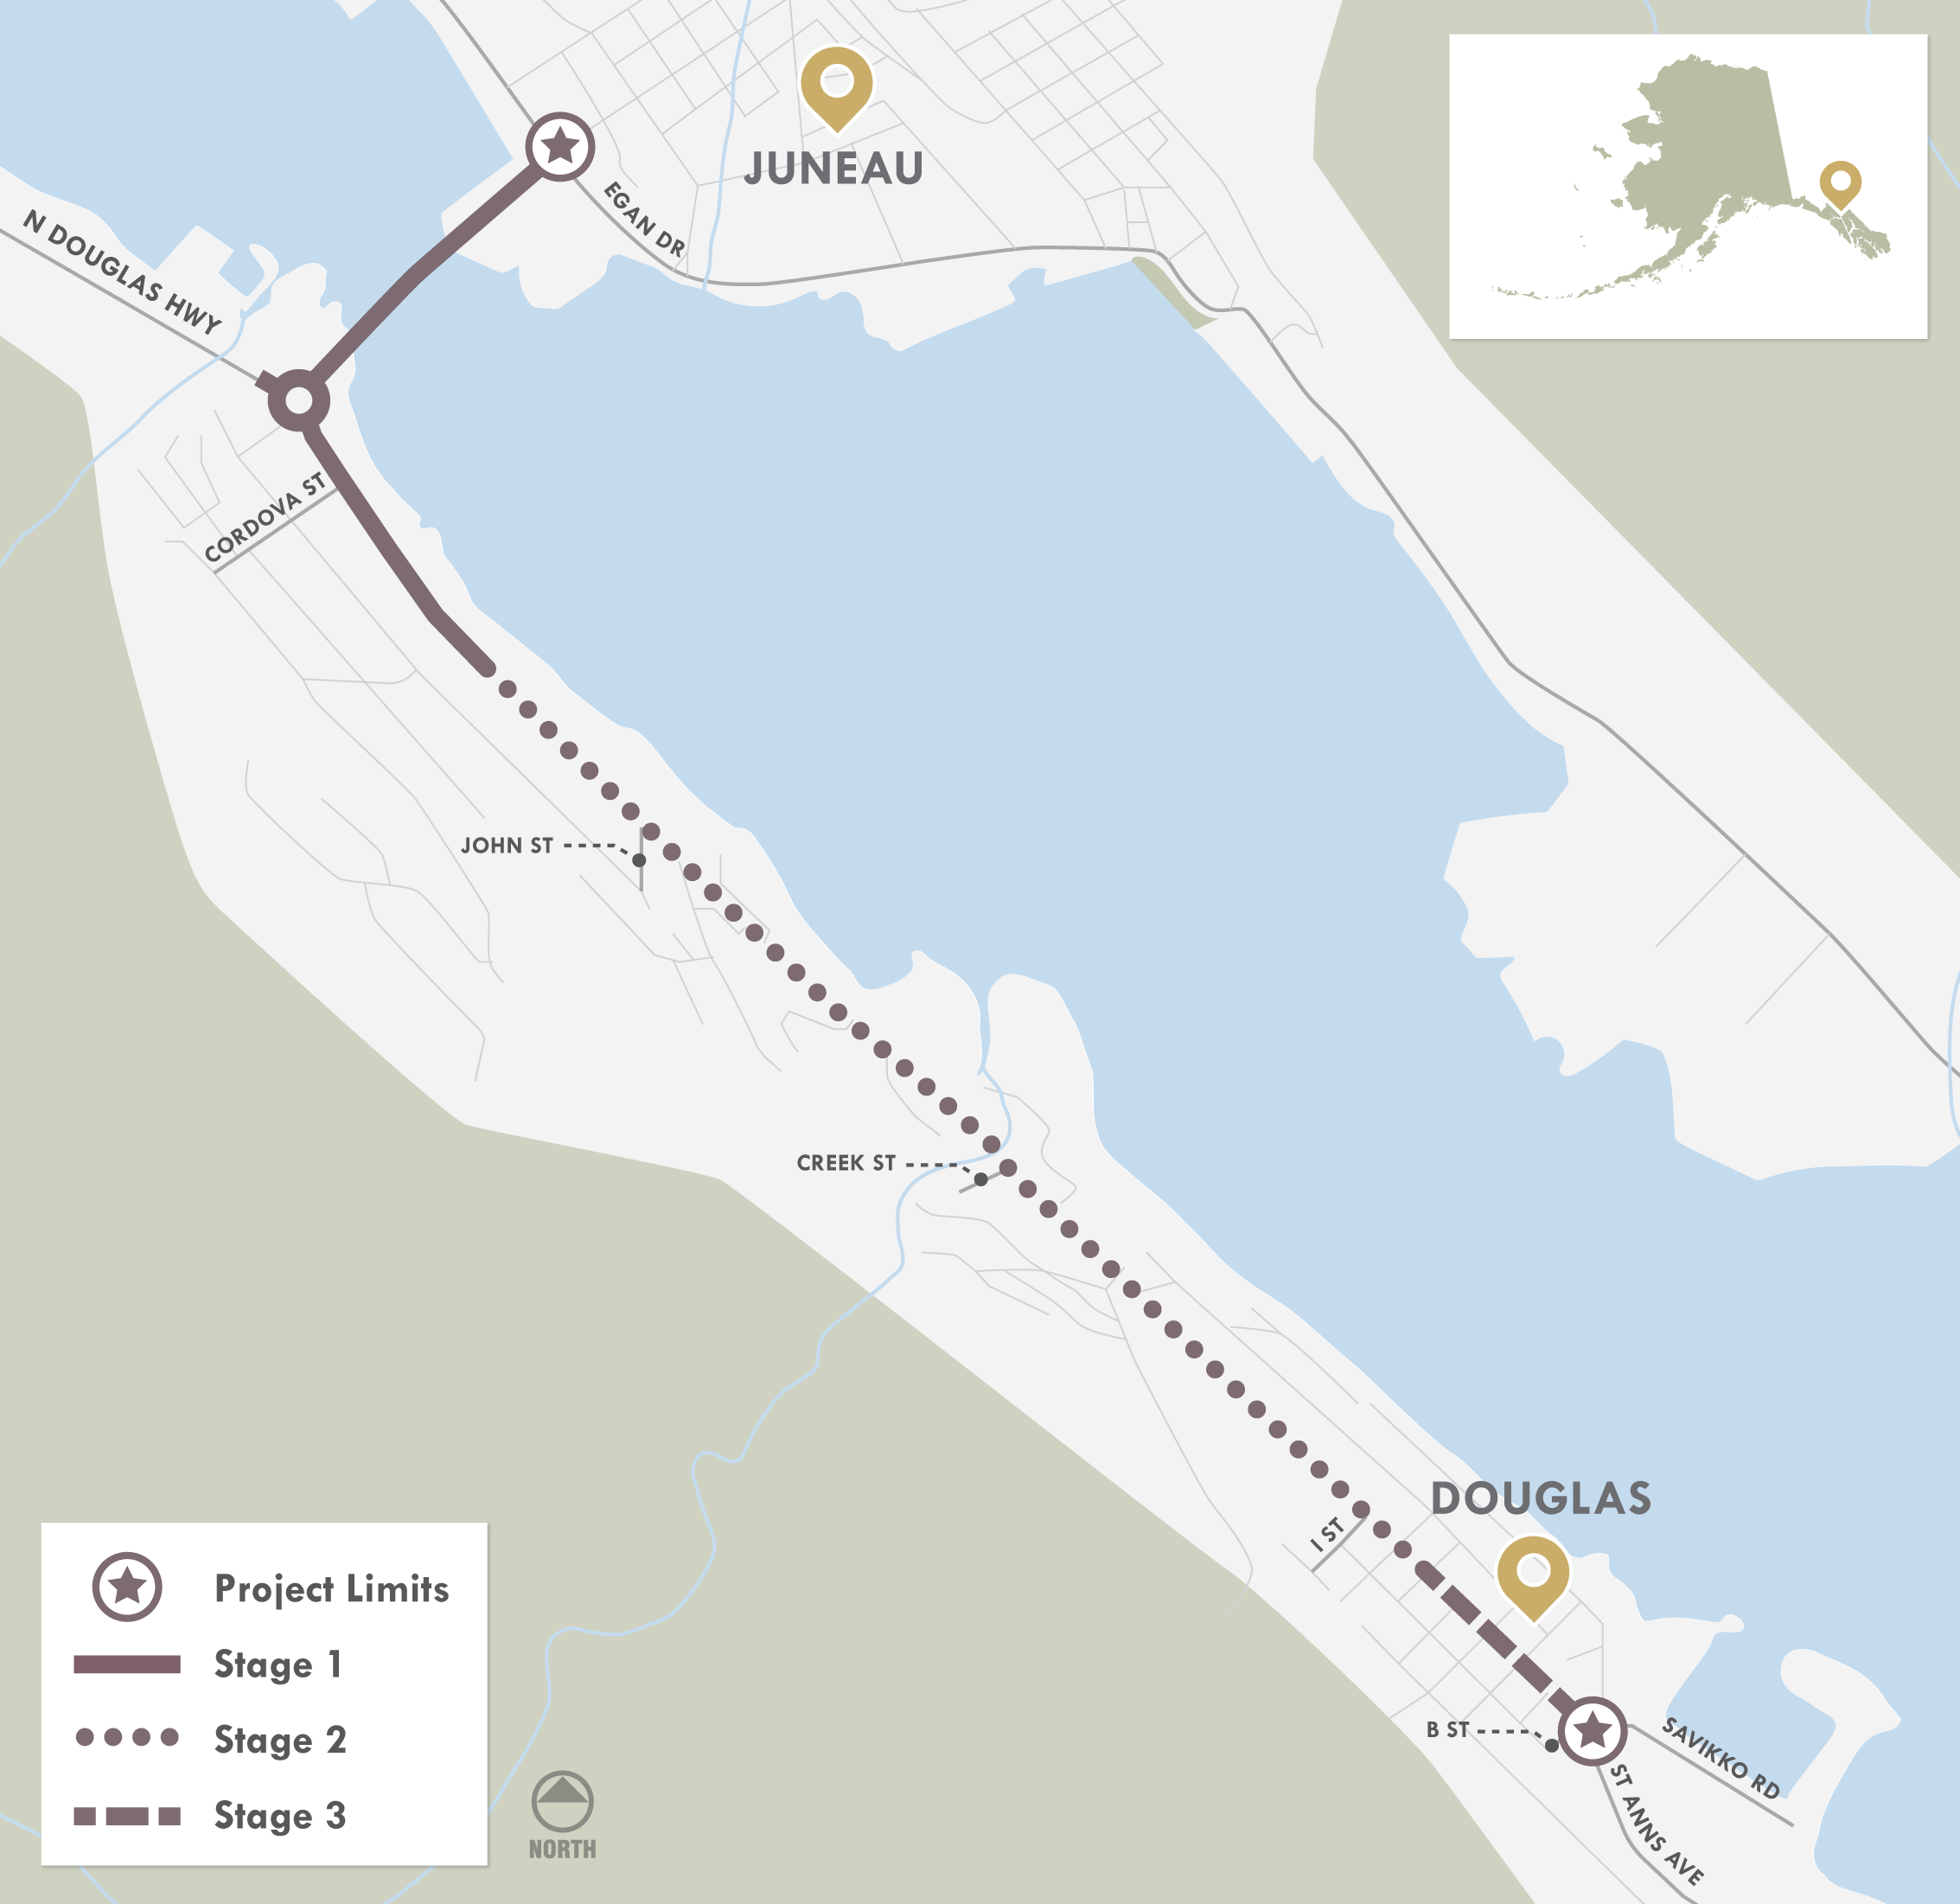 project map for the Douglas Highway resurface and repair project